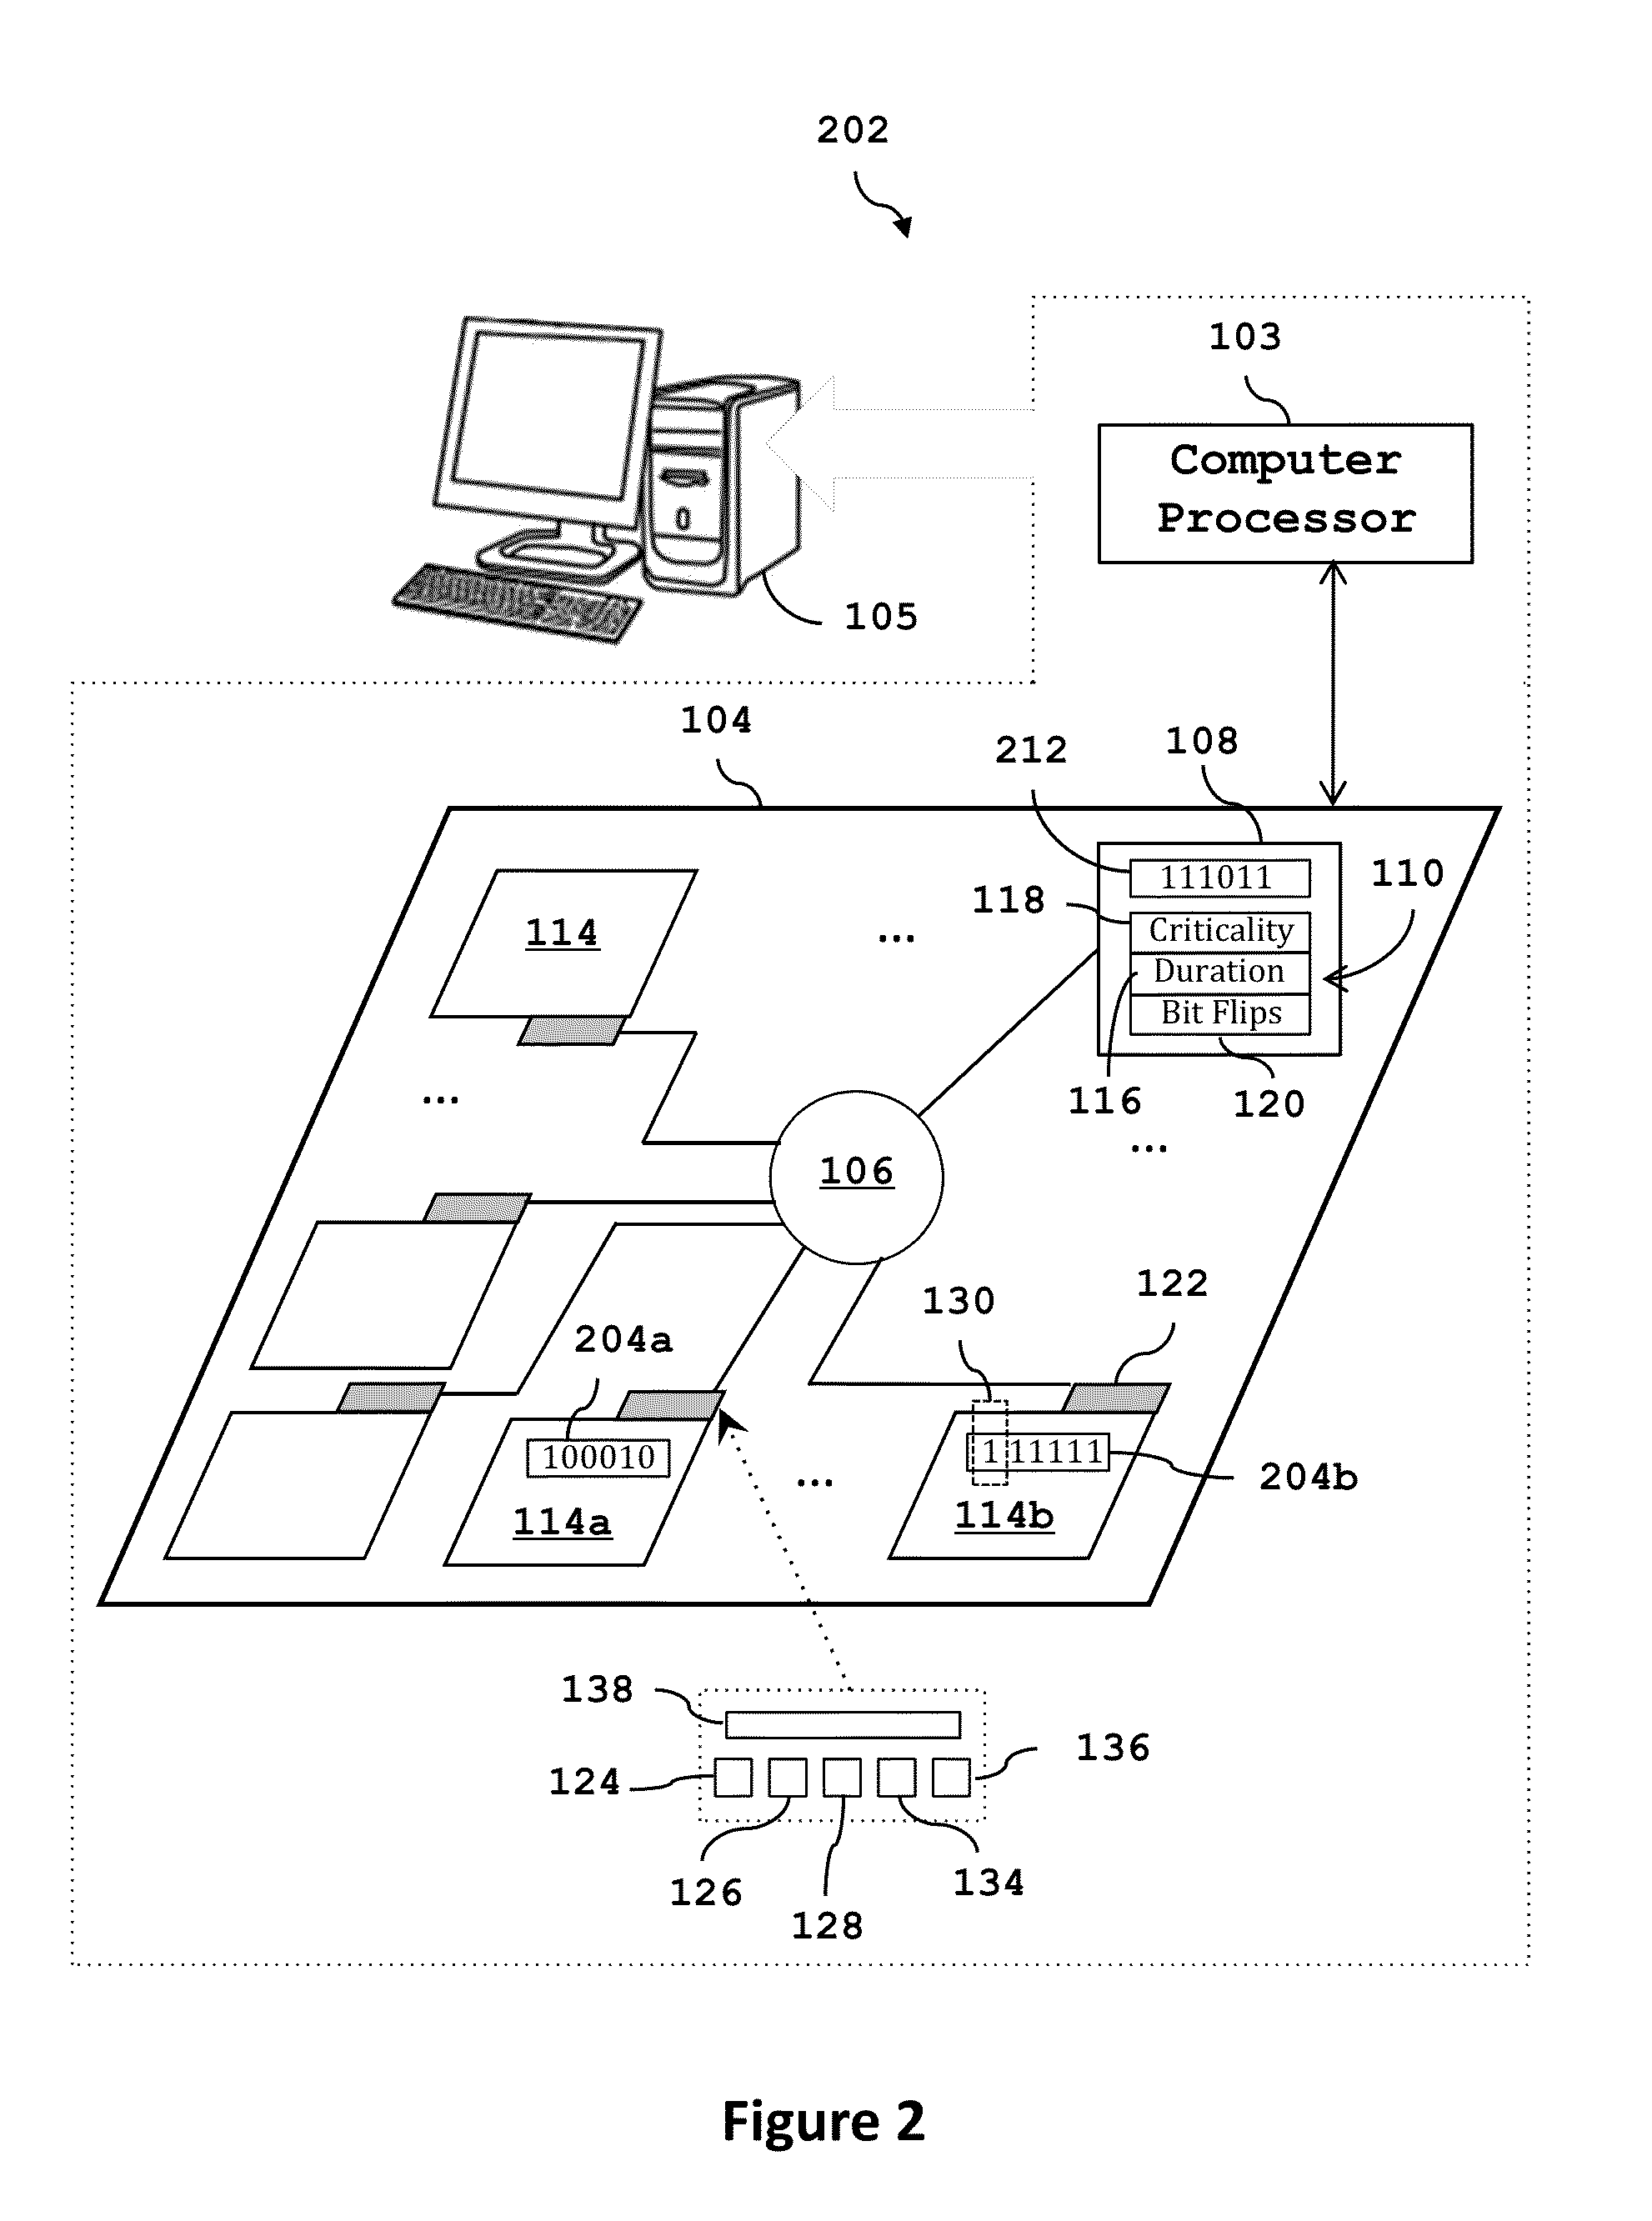 Retention management for phase change memory lifetime improvement through application and hardware profile matching